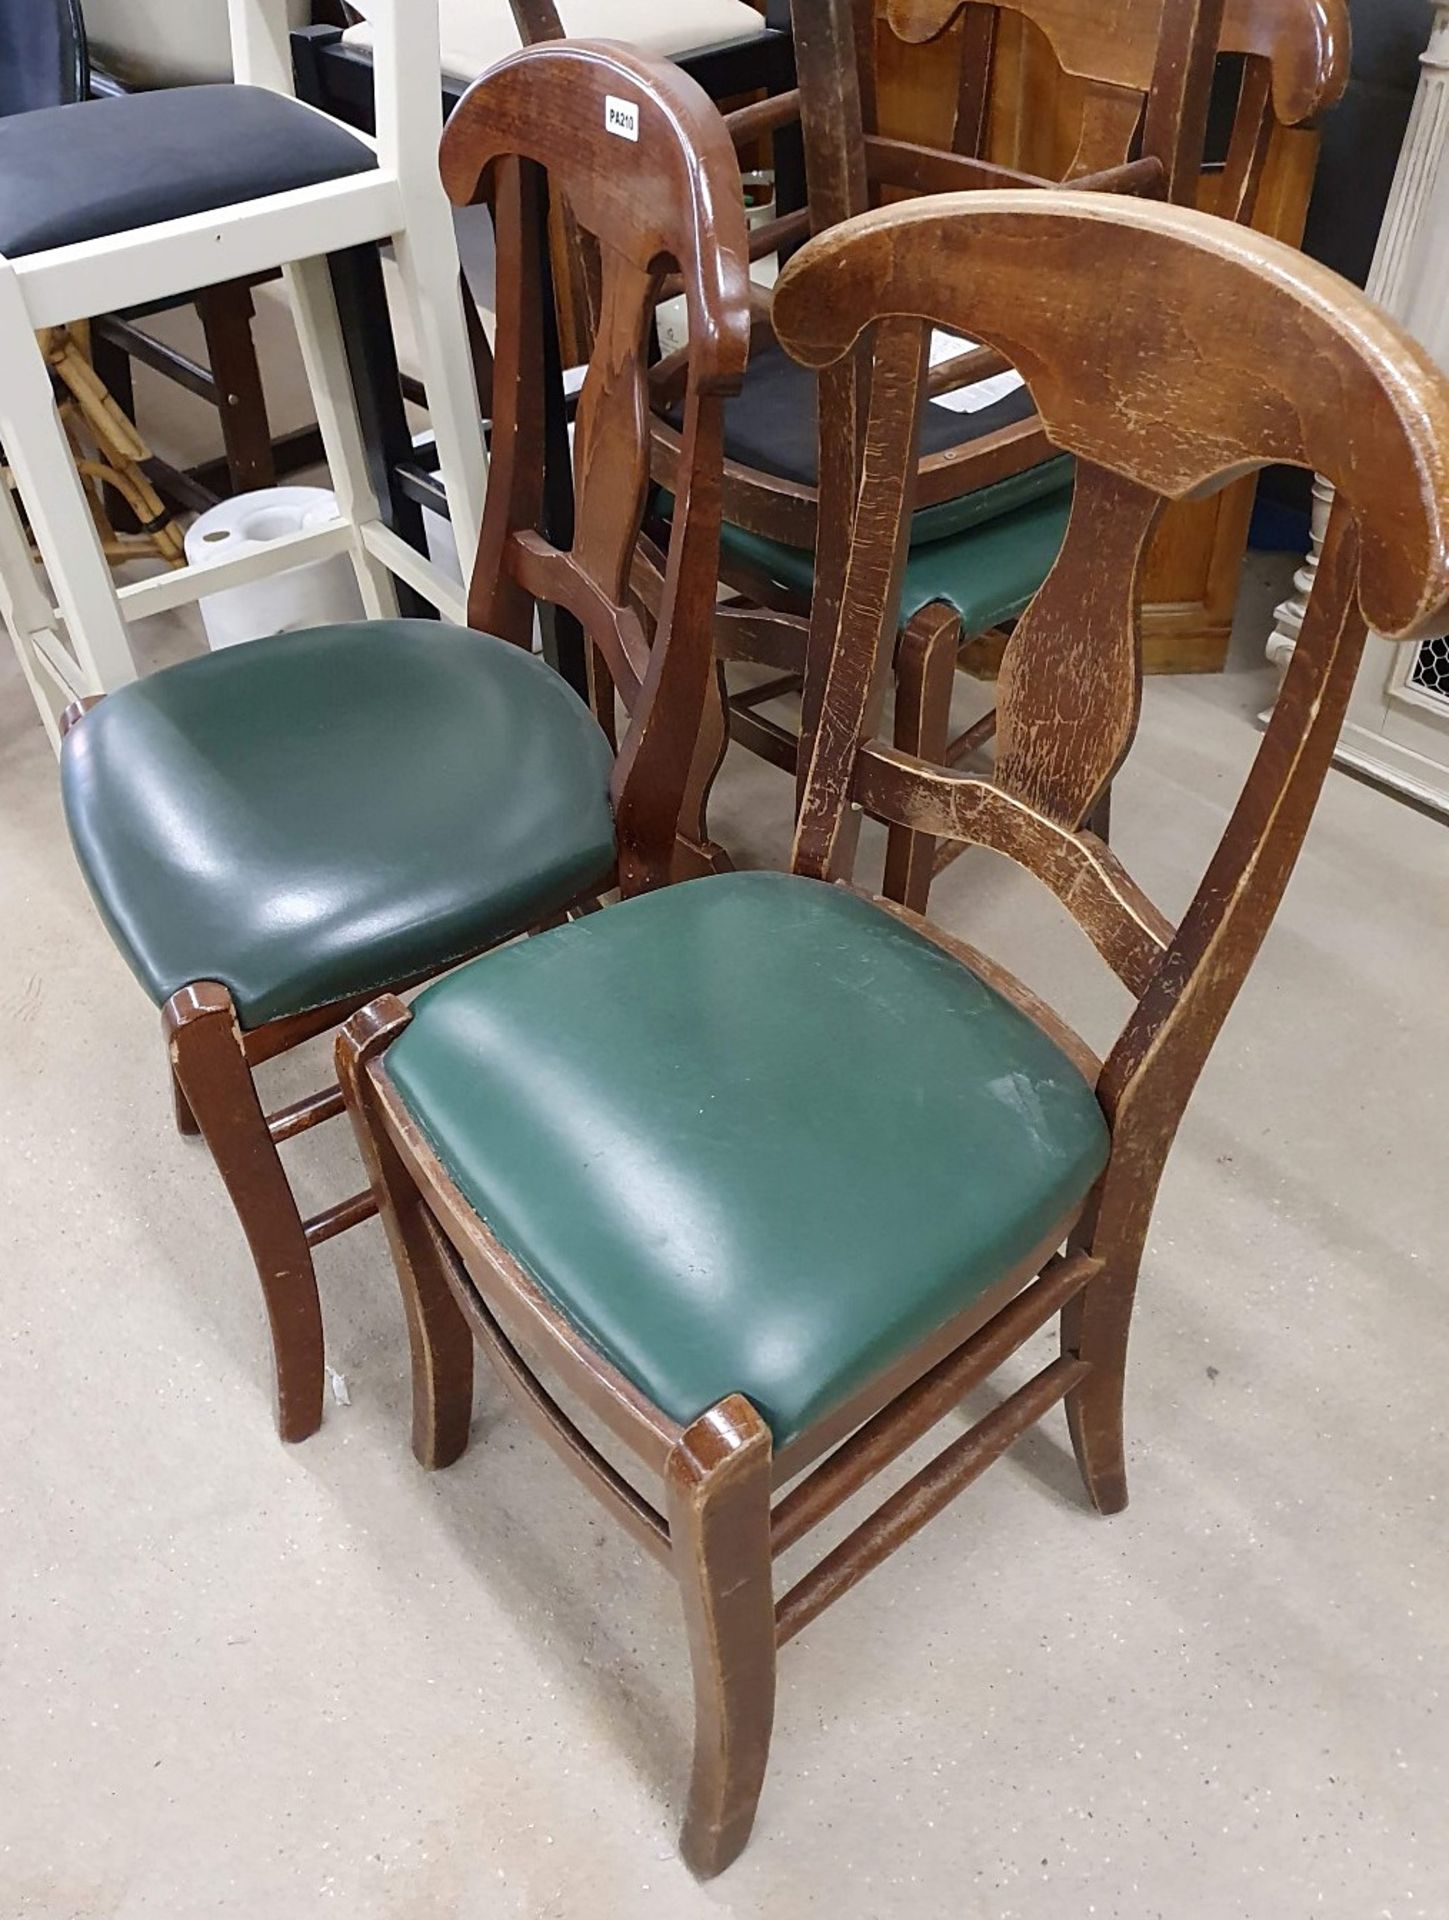 4 x Waring Dining Chairs With Green Leather Seat Pads - Ref PA210 - CL463 - Location: Altrincham WA1 - Image 3 of 4